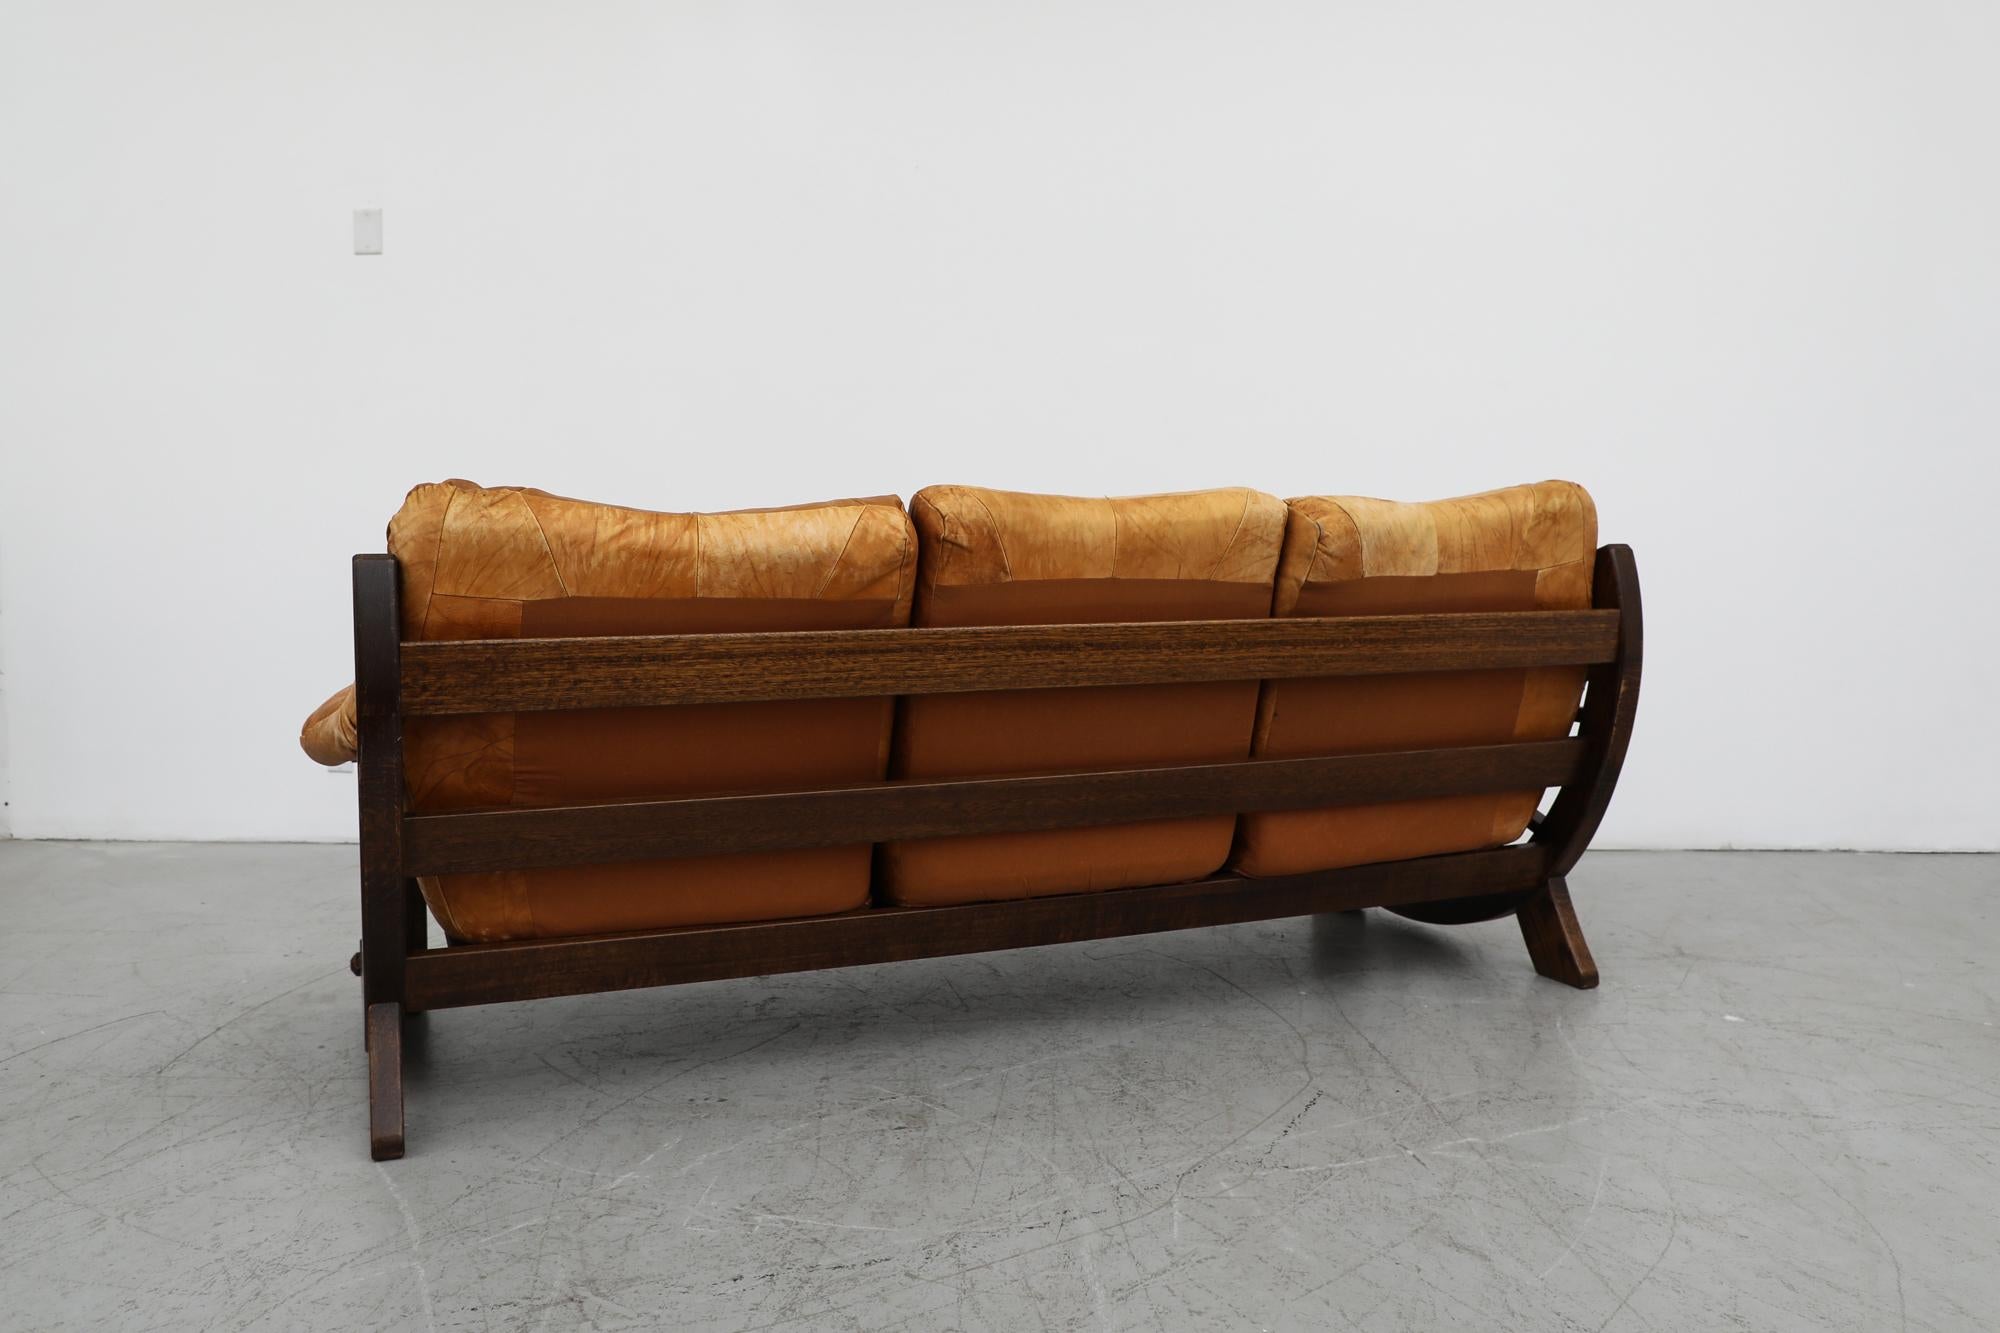 Dutch Mid-Century Brutalist Leather Patchwork Sofa with Bonanza Wood Frame For Sale